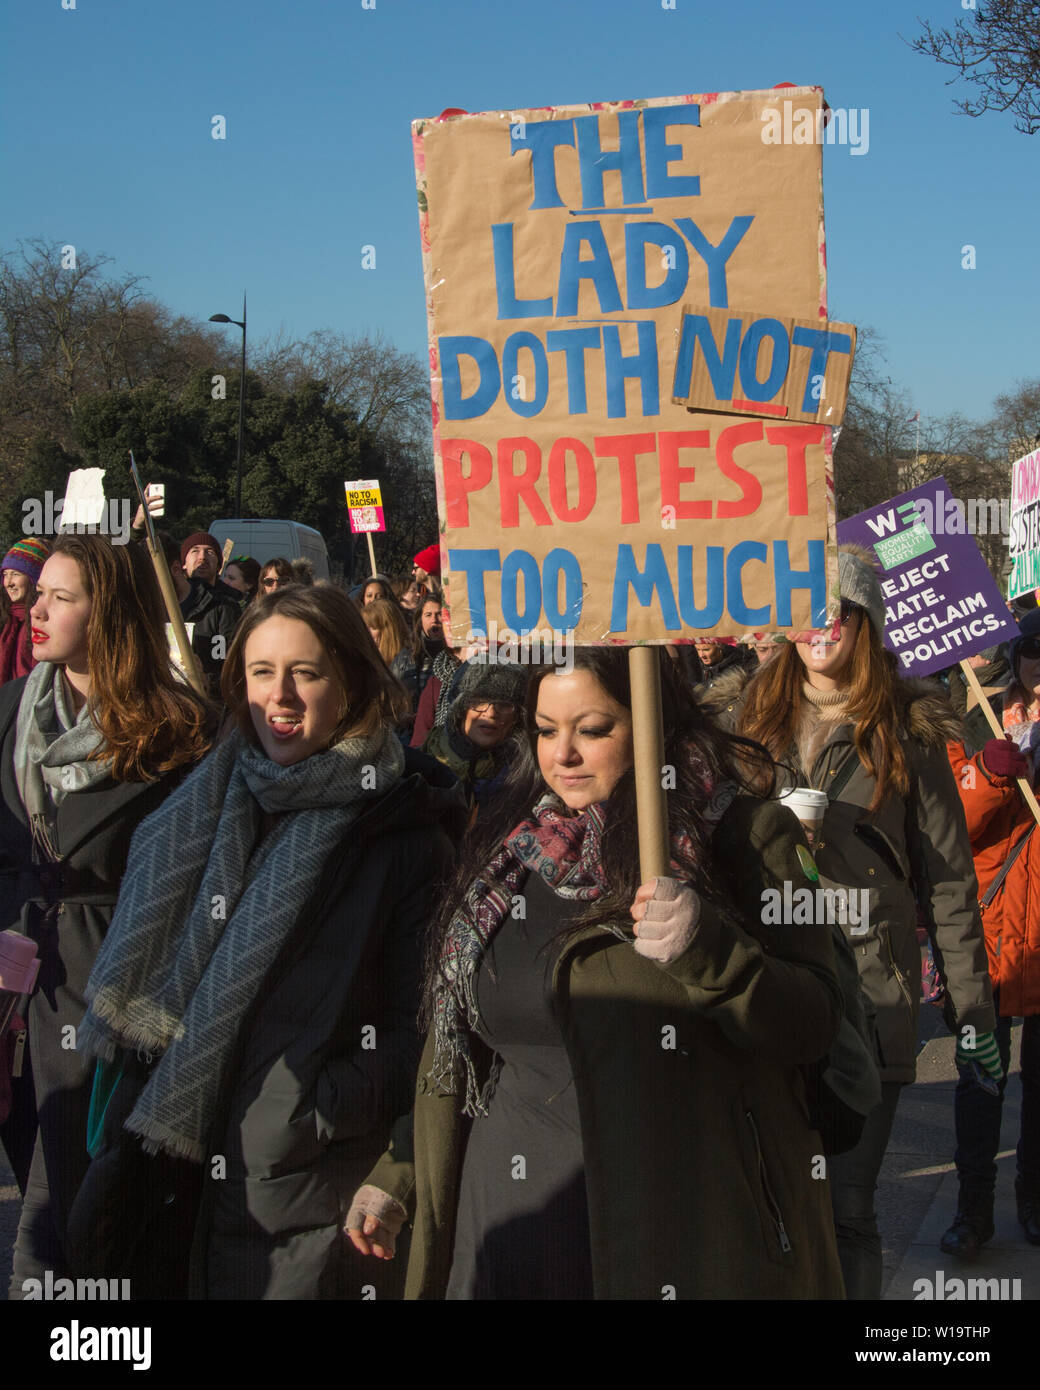 Women's March, London, UK, 21st January 2017. A woman carries a placard paraphrasing Shakespeare which reads 'The lady doth not protest too much'  the day after the inauguration of President Donald Trump. Up to 10,000 took part in the march in London as women worldwide marked the day by marching in an act of international solidarity. Many carried placards referencing statements made by Donald Trump, considered by many as anti-women or otherwise offensive. Stock Photo